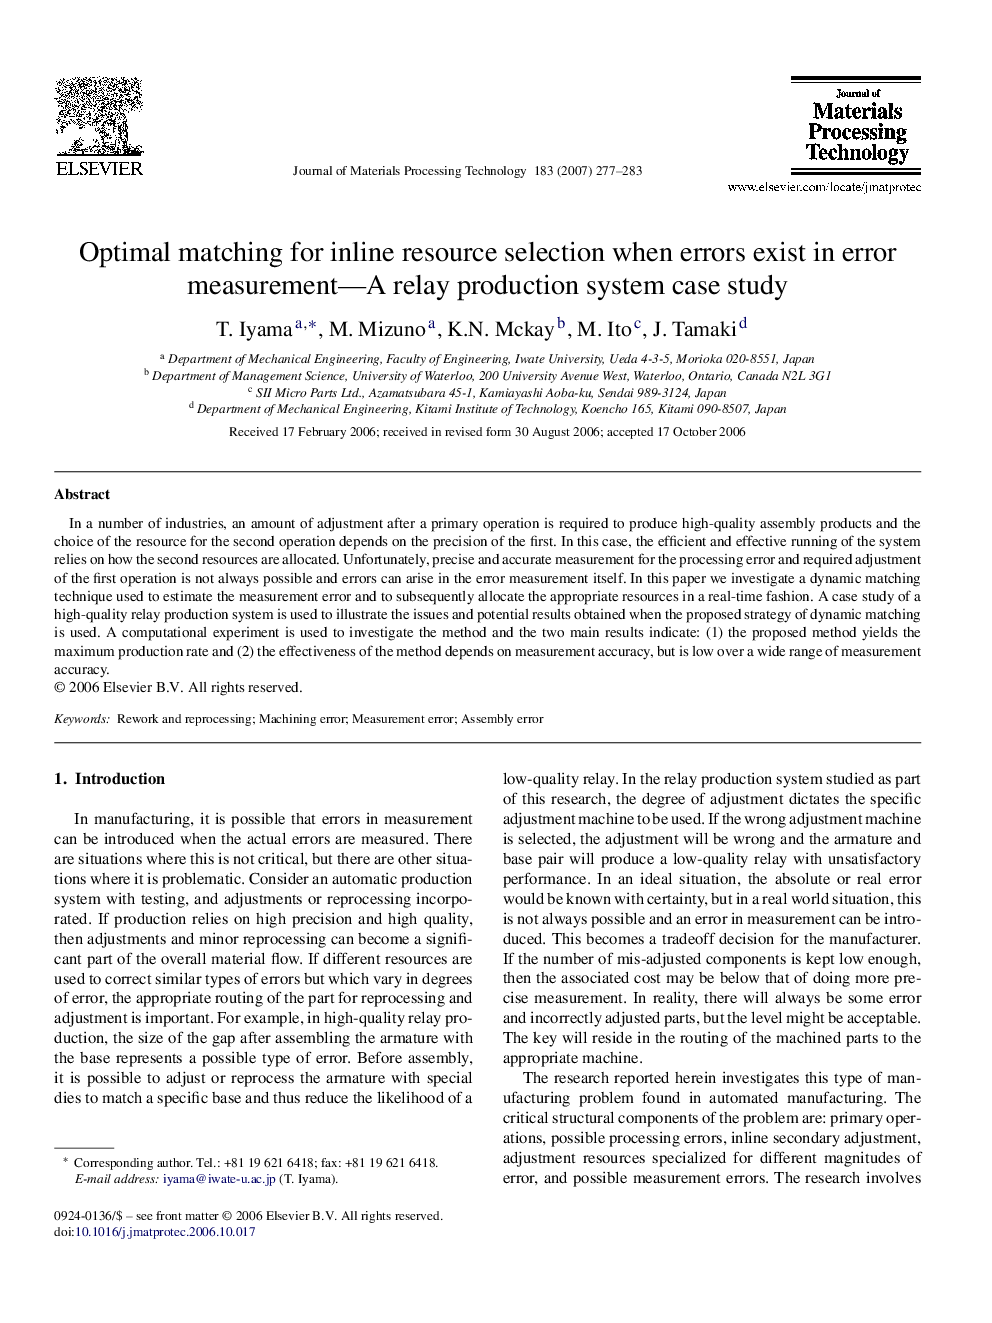 Optimal matching for inline resource selection when errors exist in error measurement—A relay production system case study